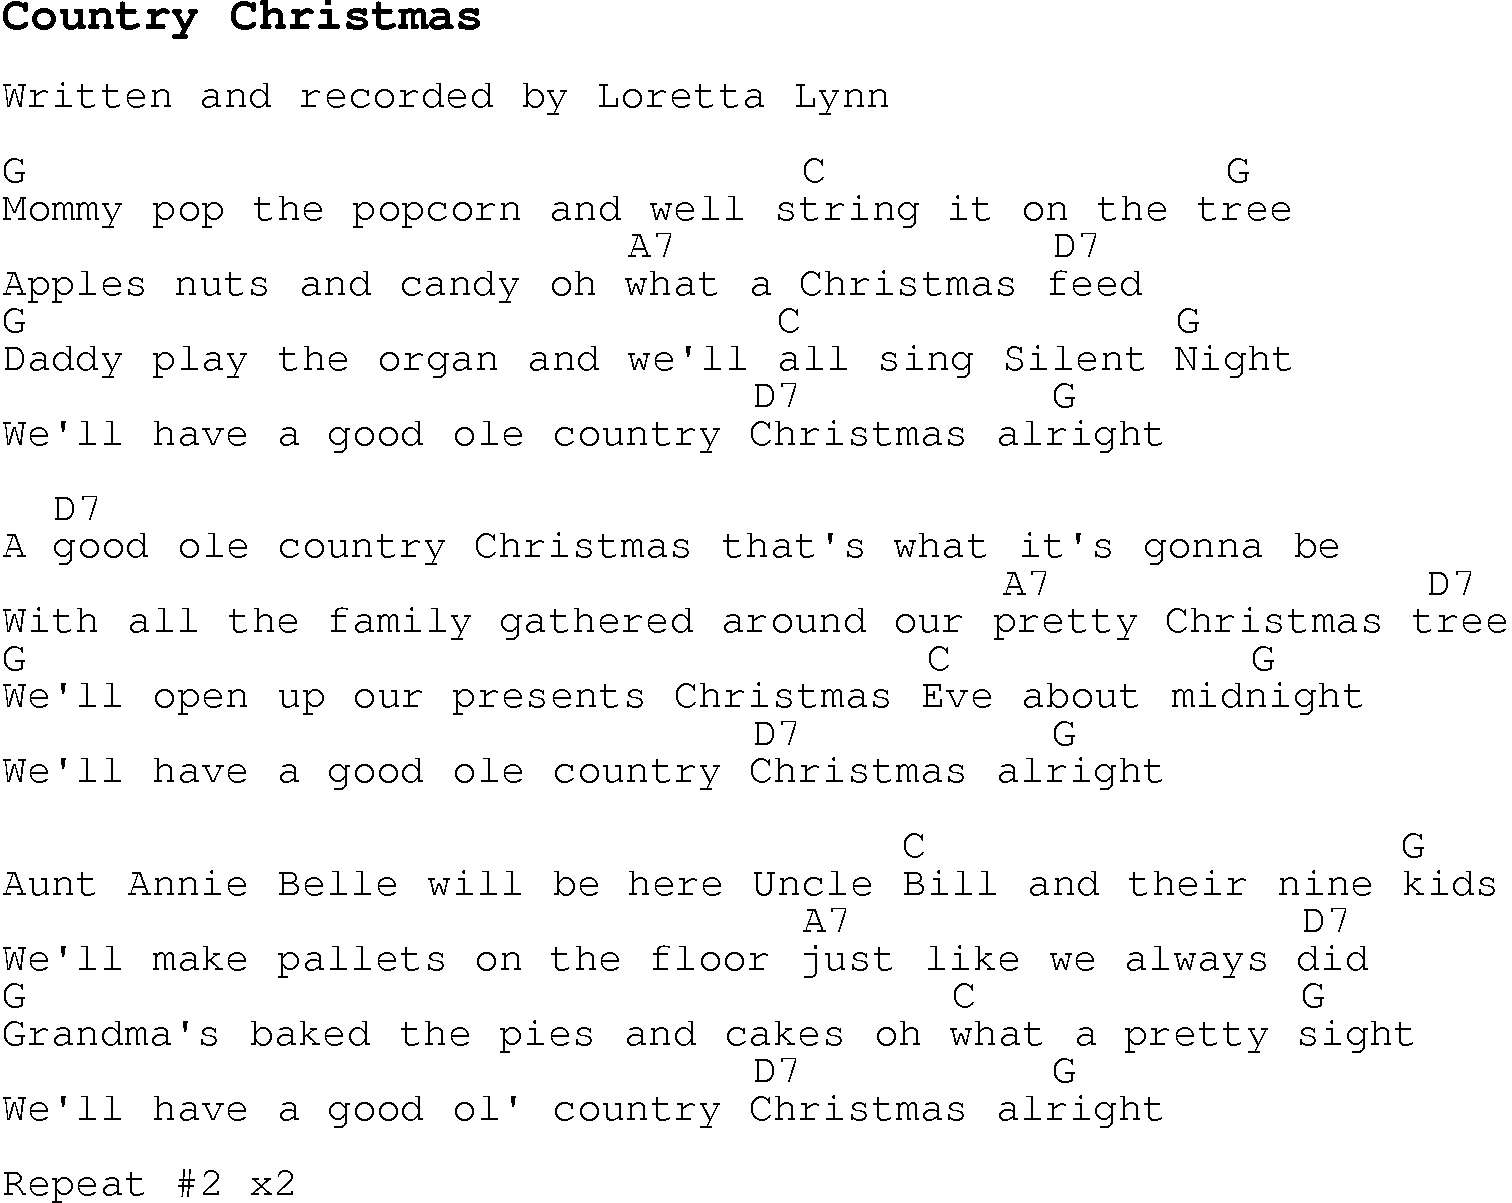 Christmas Songs and Carols, lyrics with chords for guitar banjo for Country Christmas